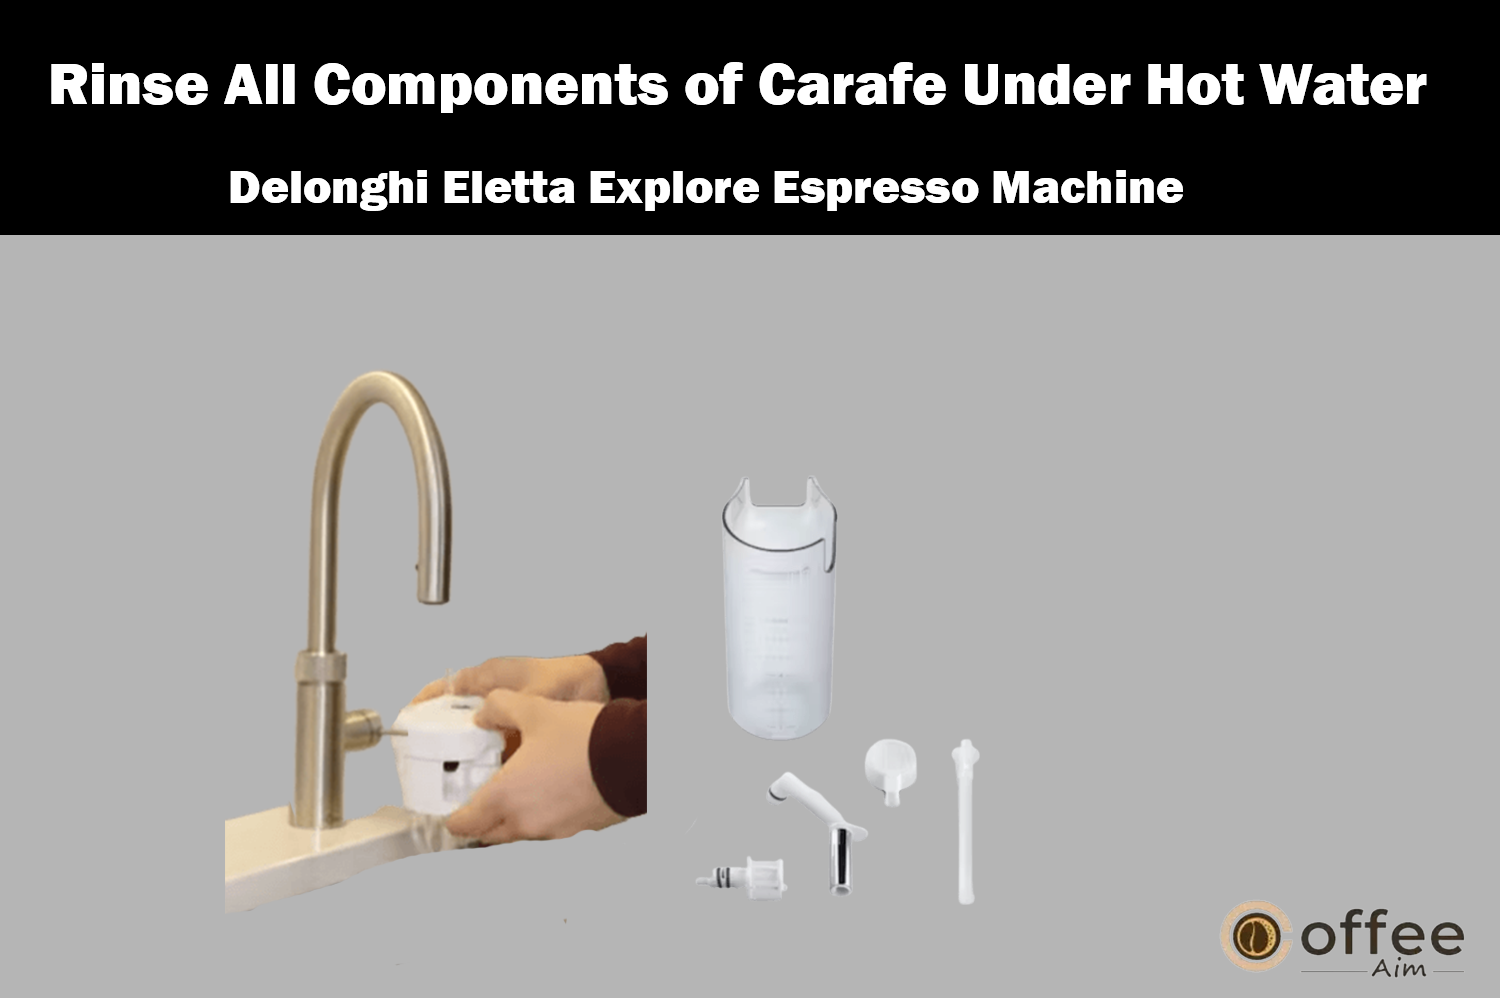 The image shows the procedure of rinsing all carafe components under hot water for the "Delonghi Eletta Explore Espresso Machine," as detailed in the article "How to Use the Delonghi Eletta Explore Espresso Machine."